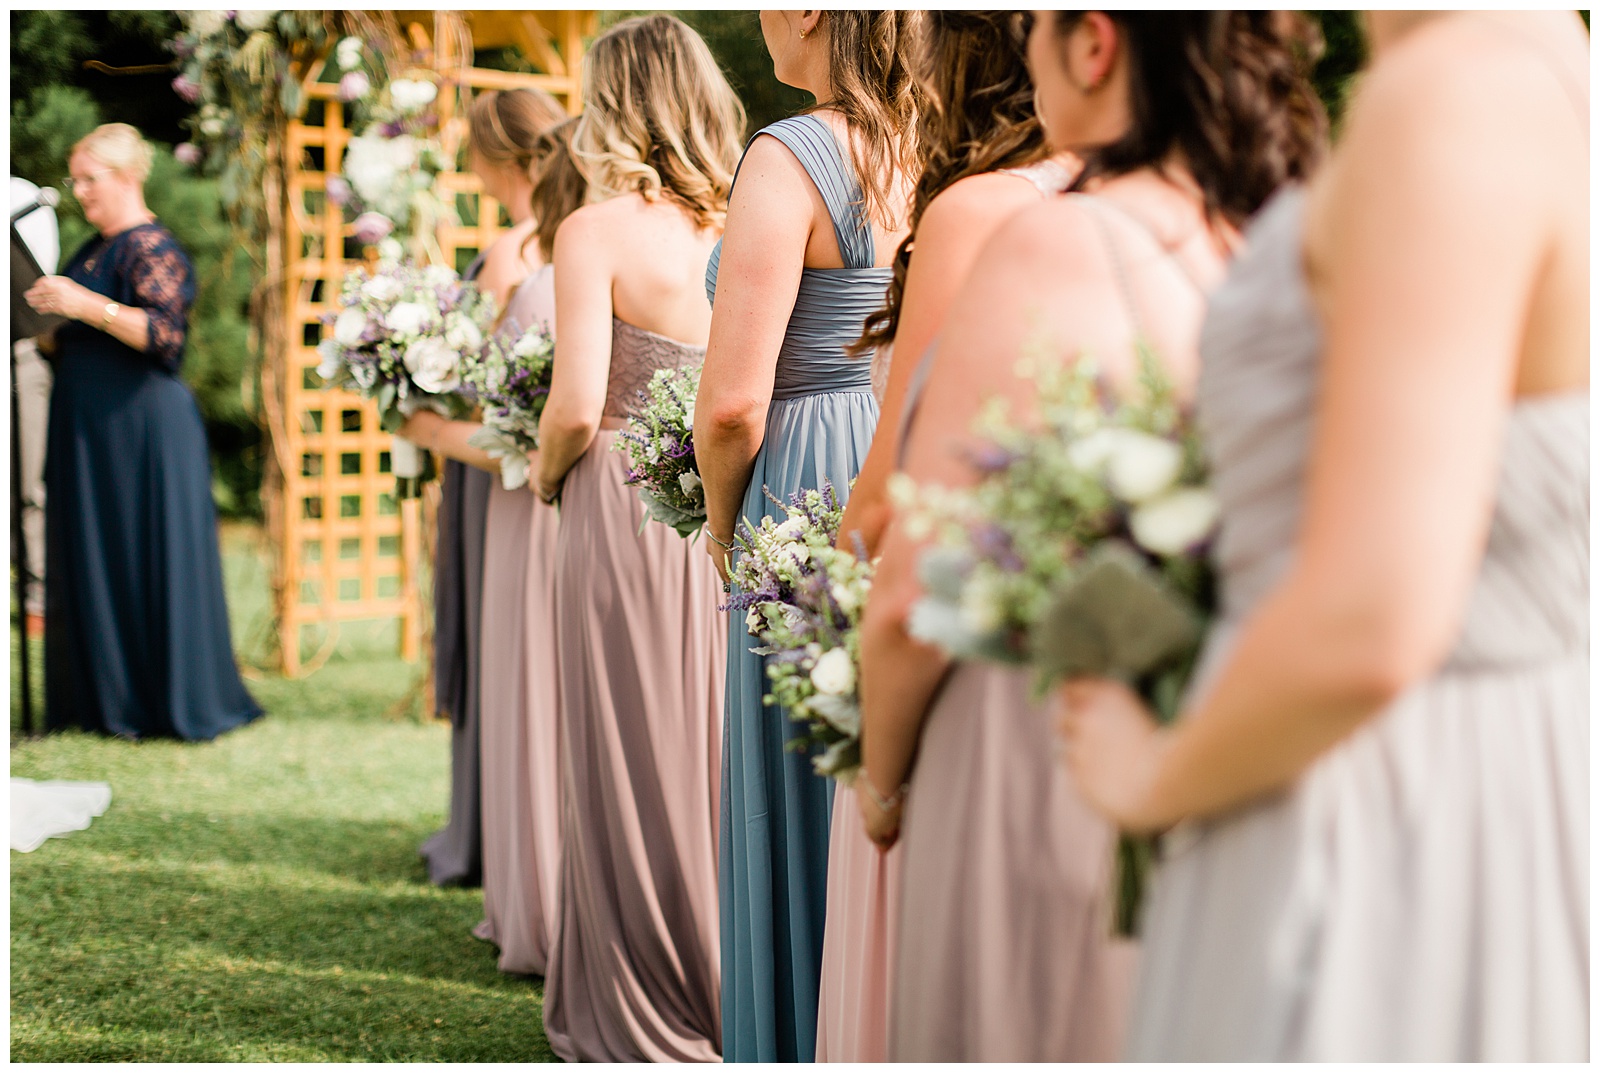 pastel bridesmaid dresses in mixed colors